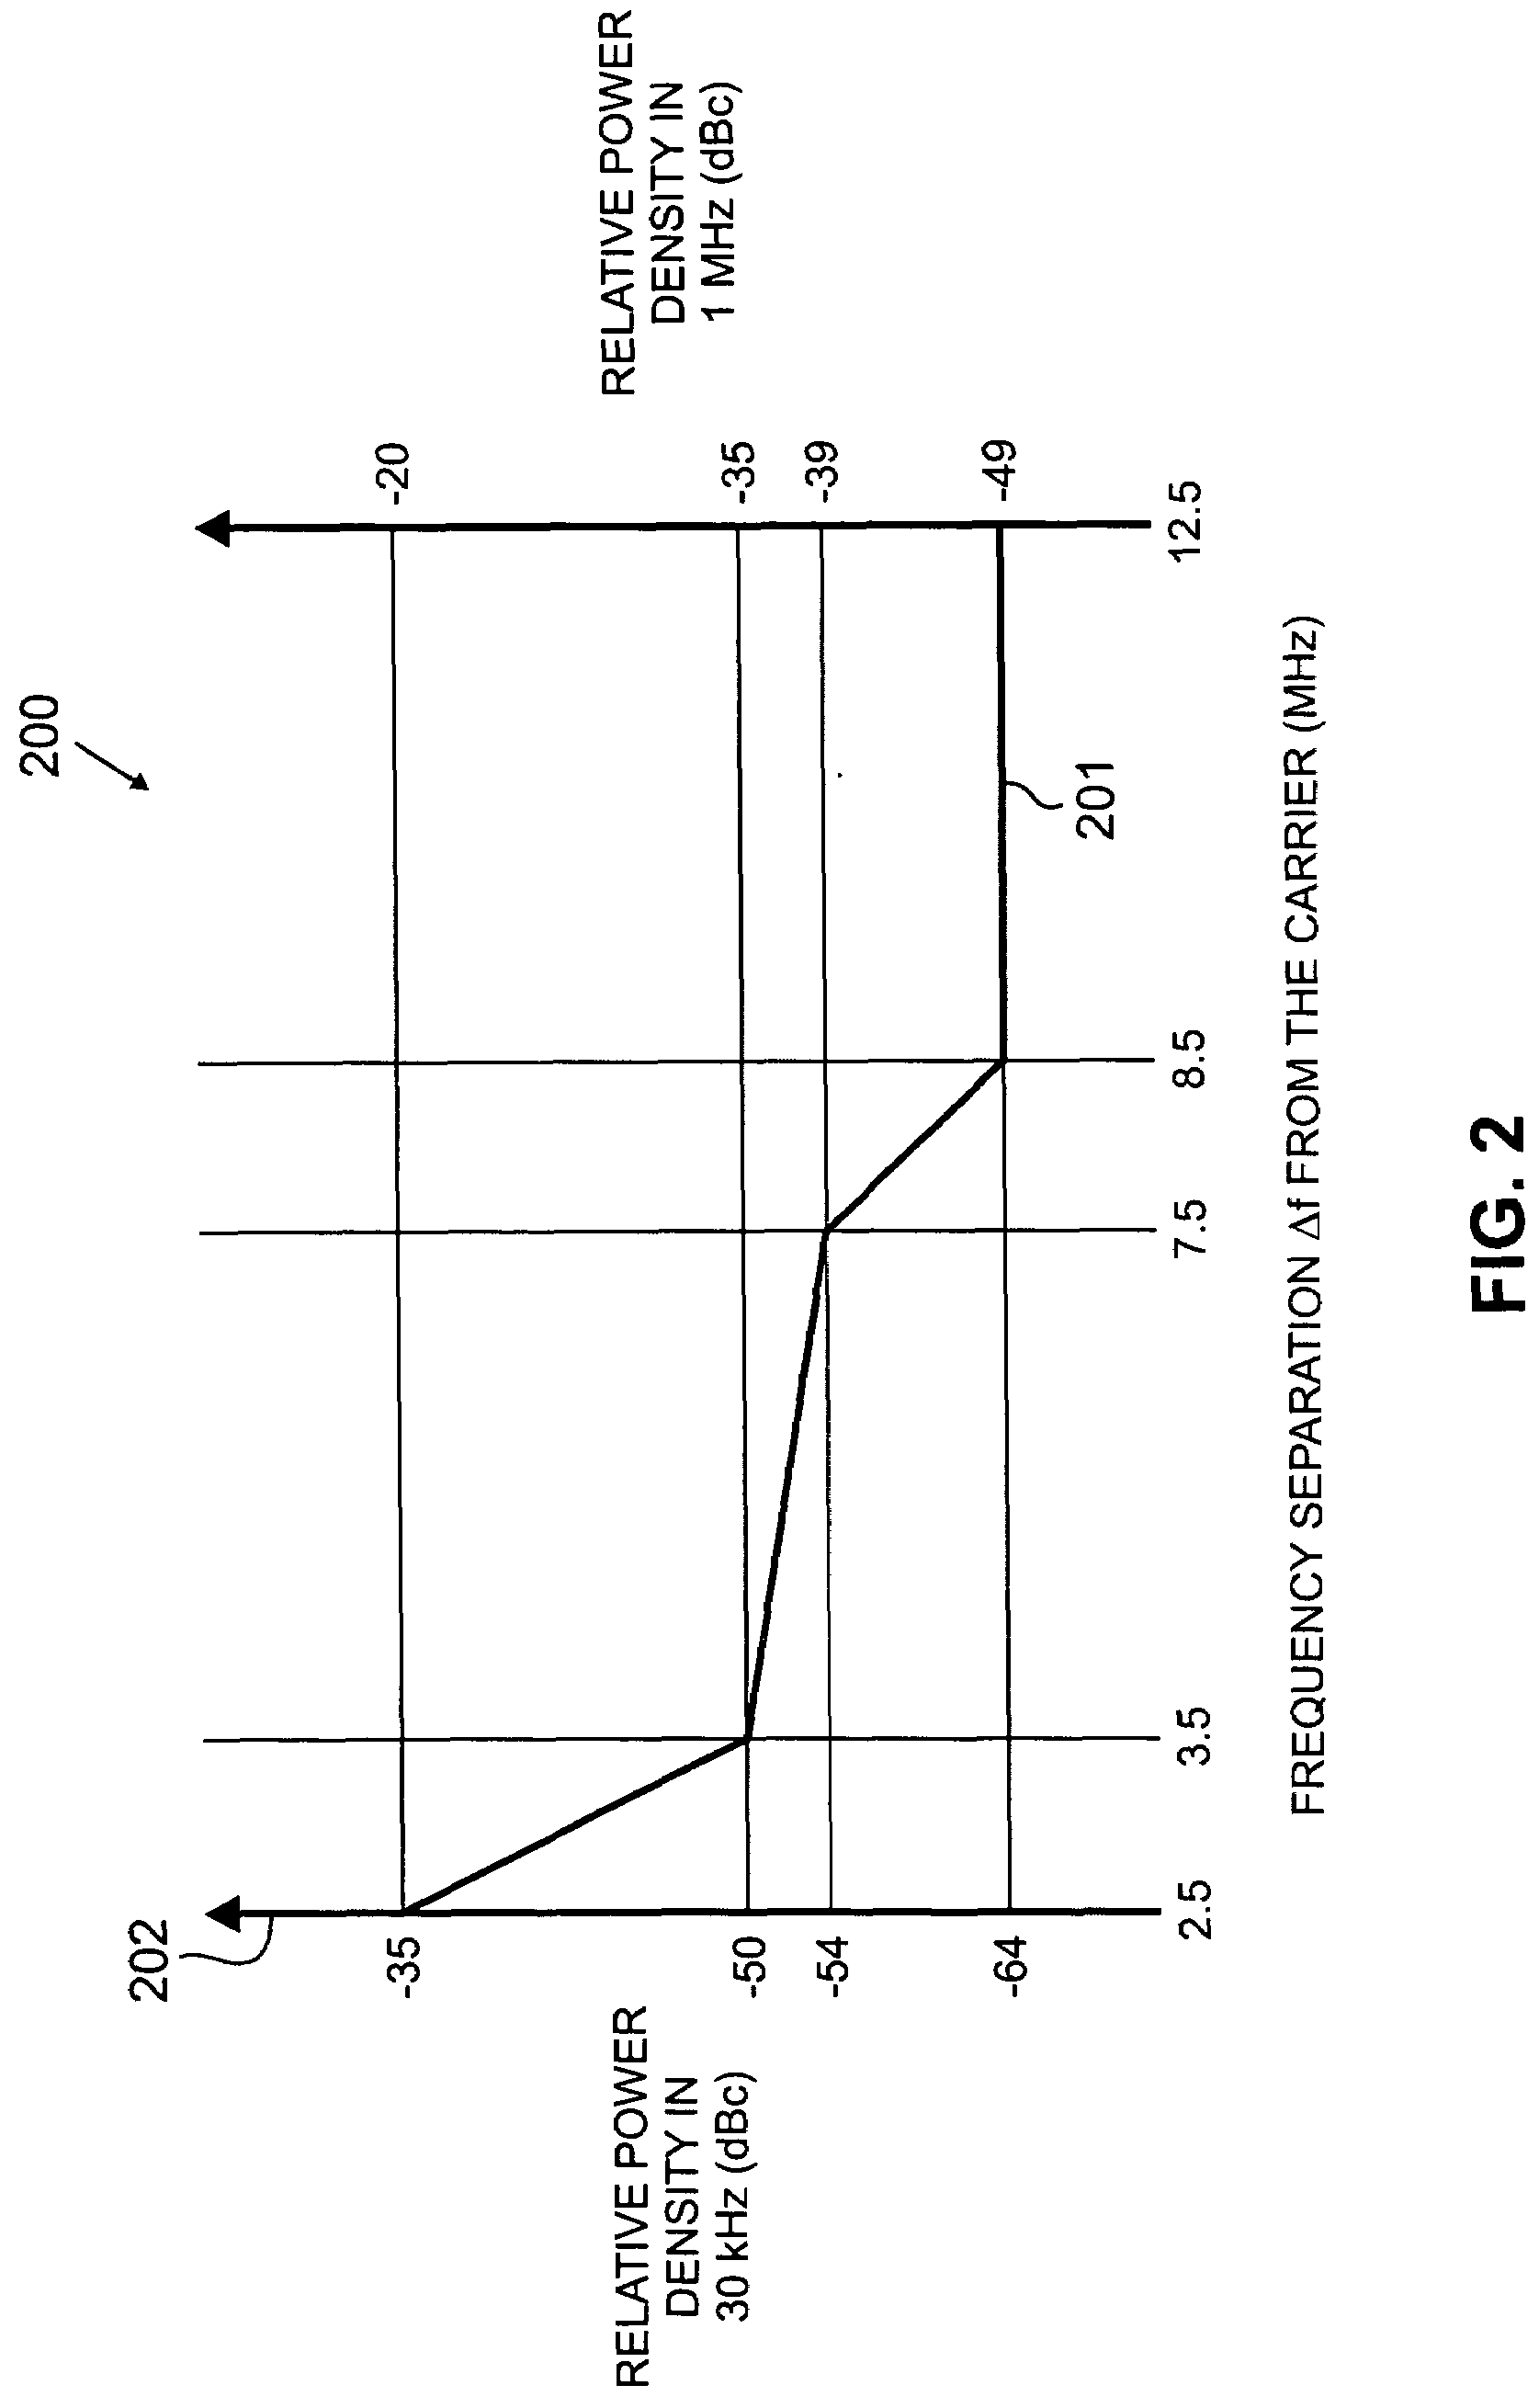 MIMO transmitter with pooled adaptive digital filtering